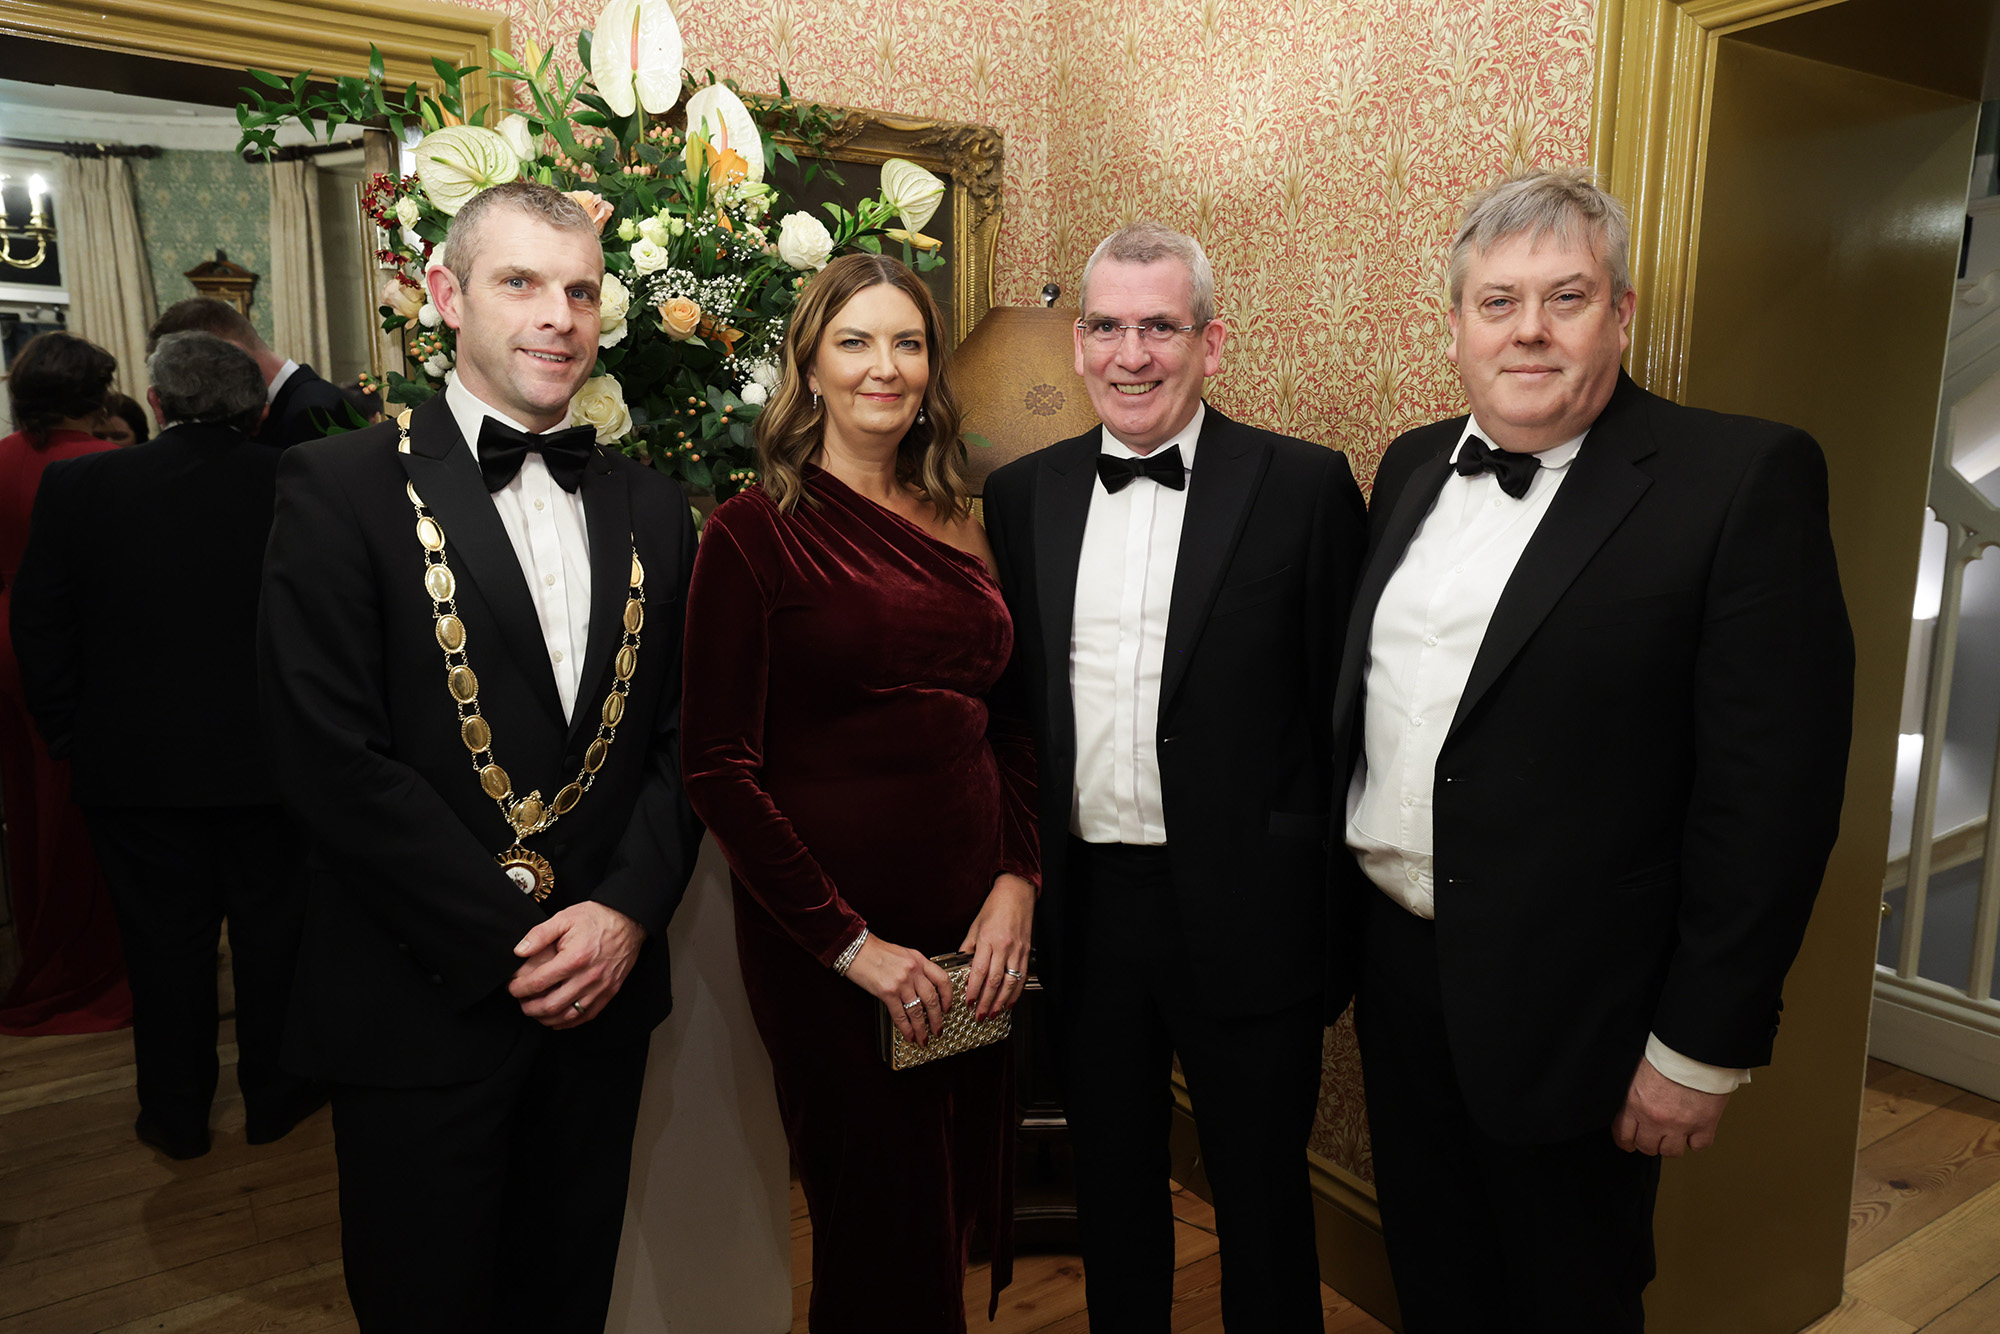 #InPictures: Irish Chief Justice joins lawyers in Newry